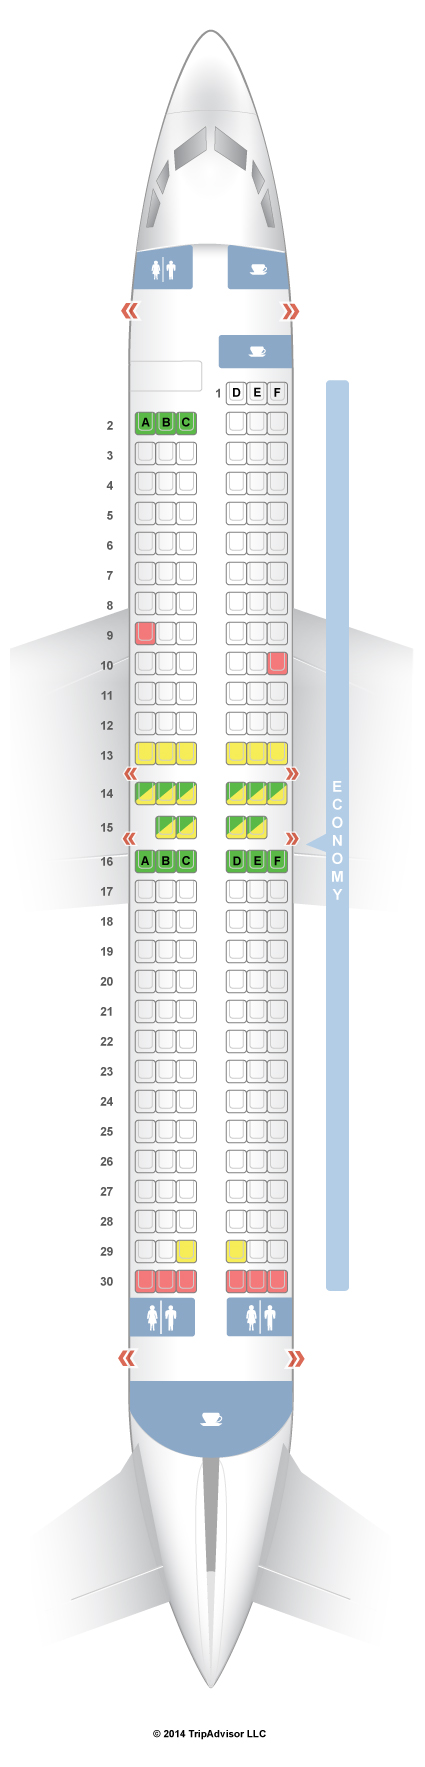 seat assignments for southwest